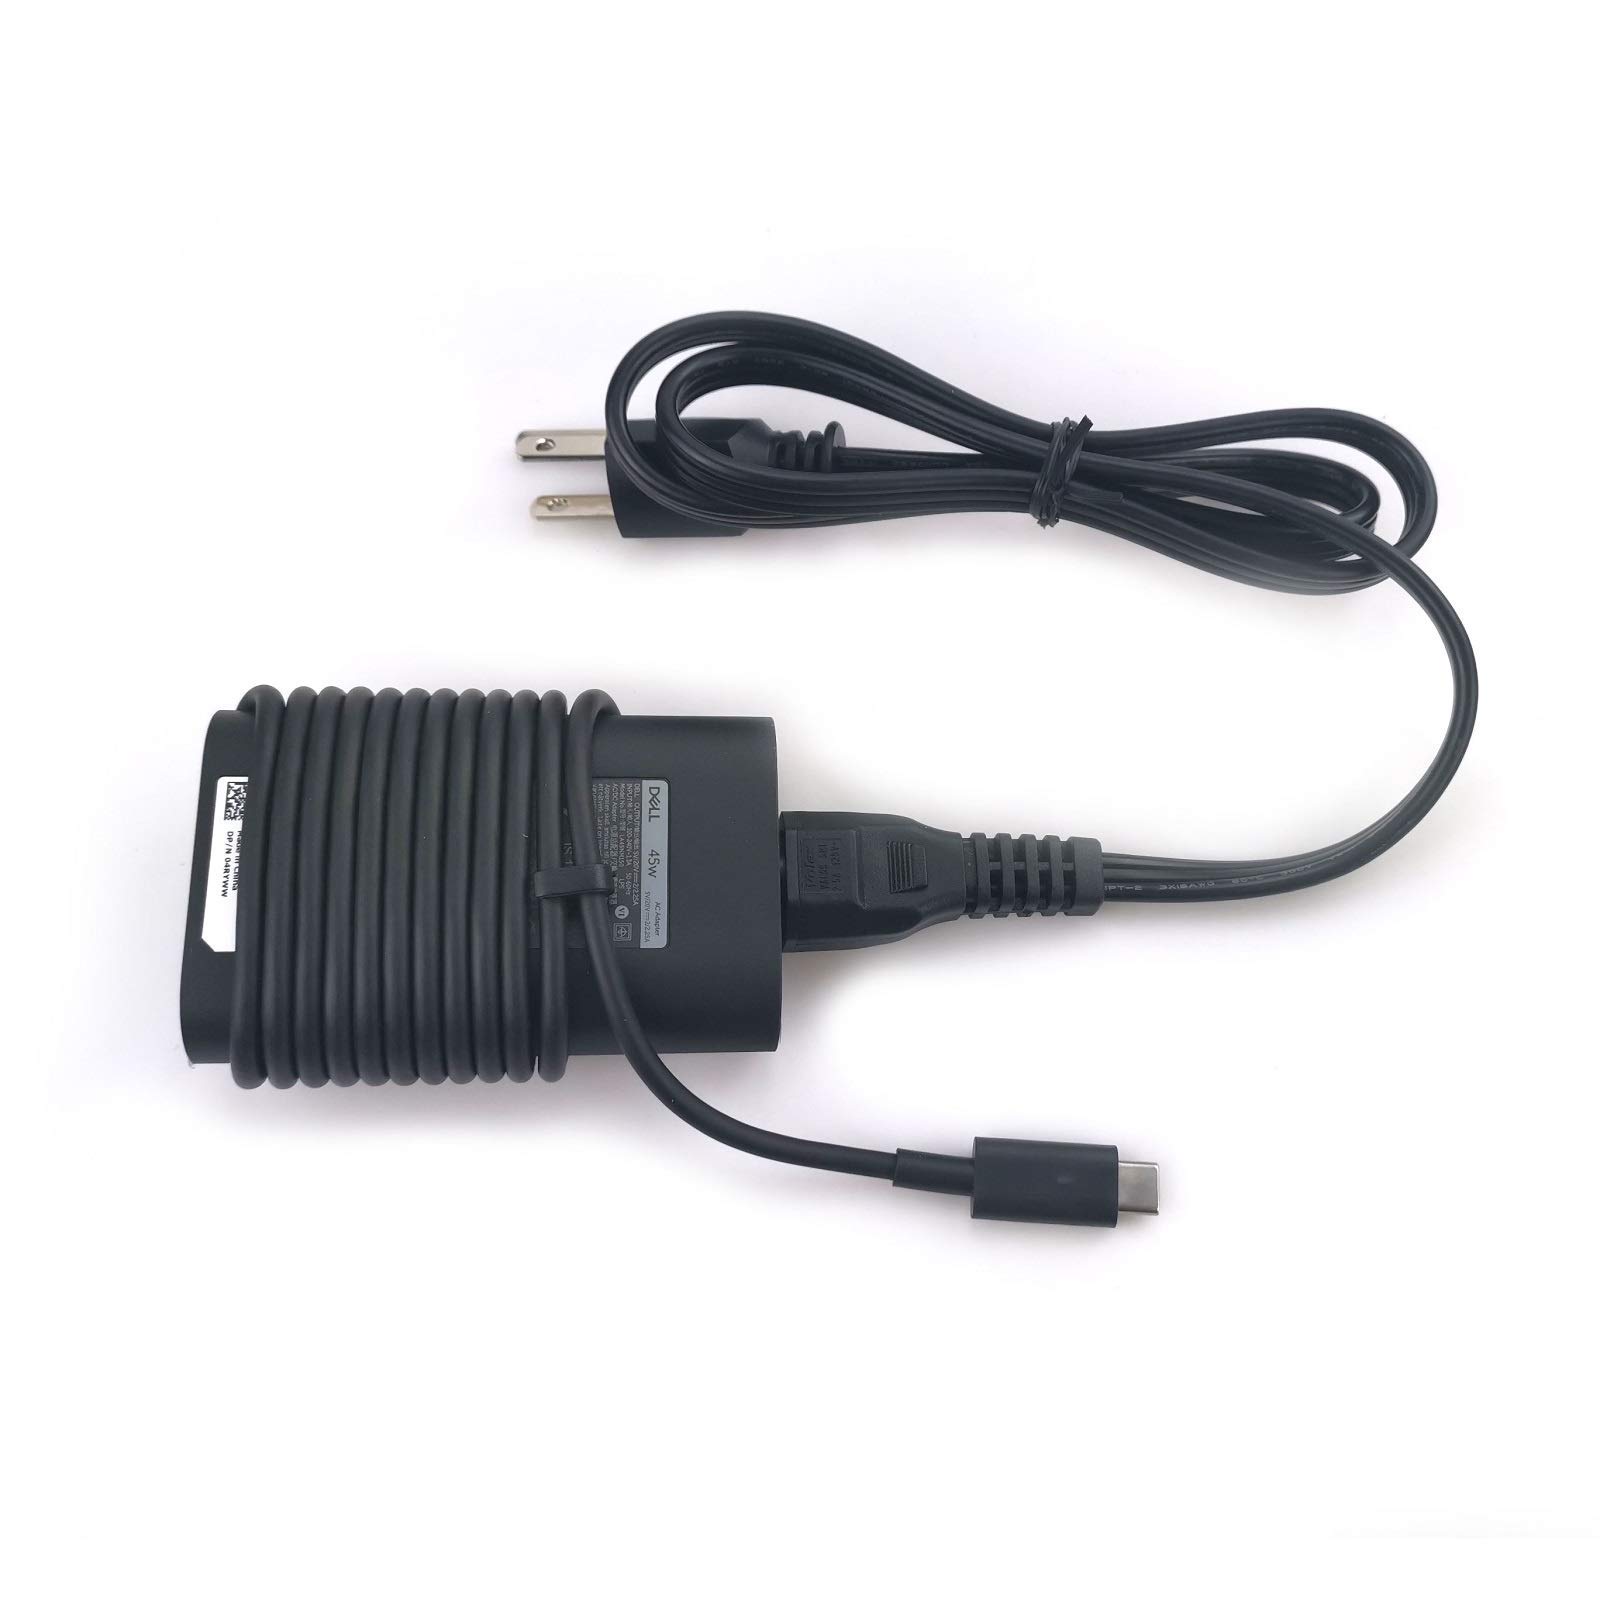 Mua New Dell Laptop Charger 45W watt USB Type C (USB-C) AC Power Adapter  Include Power Cord for Dell XPS 13 9365 9370 9380,Latitude 7275 7370 5175  5285 5290-2in1 7390-2in1,LA45NM150,0HDCY5 trên Amazon